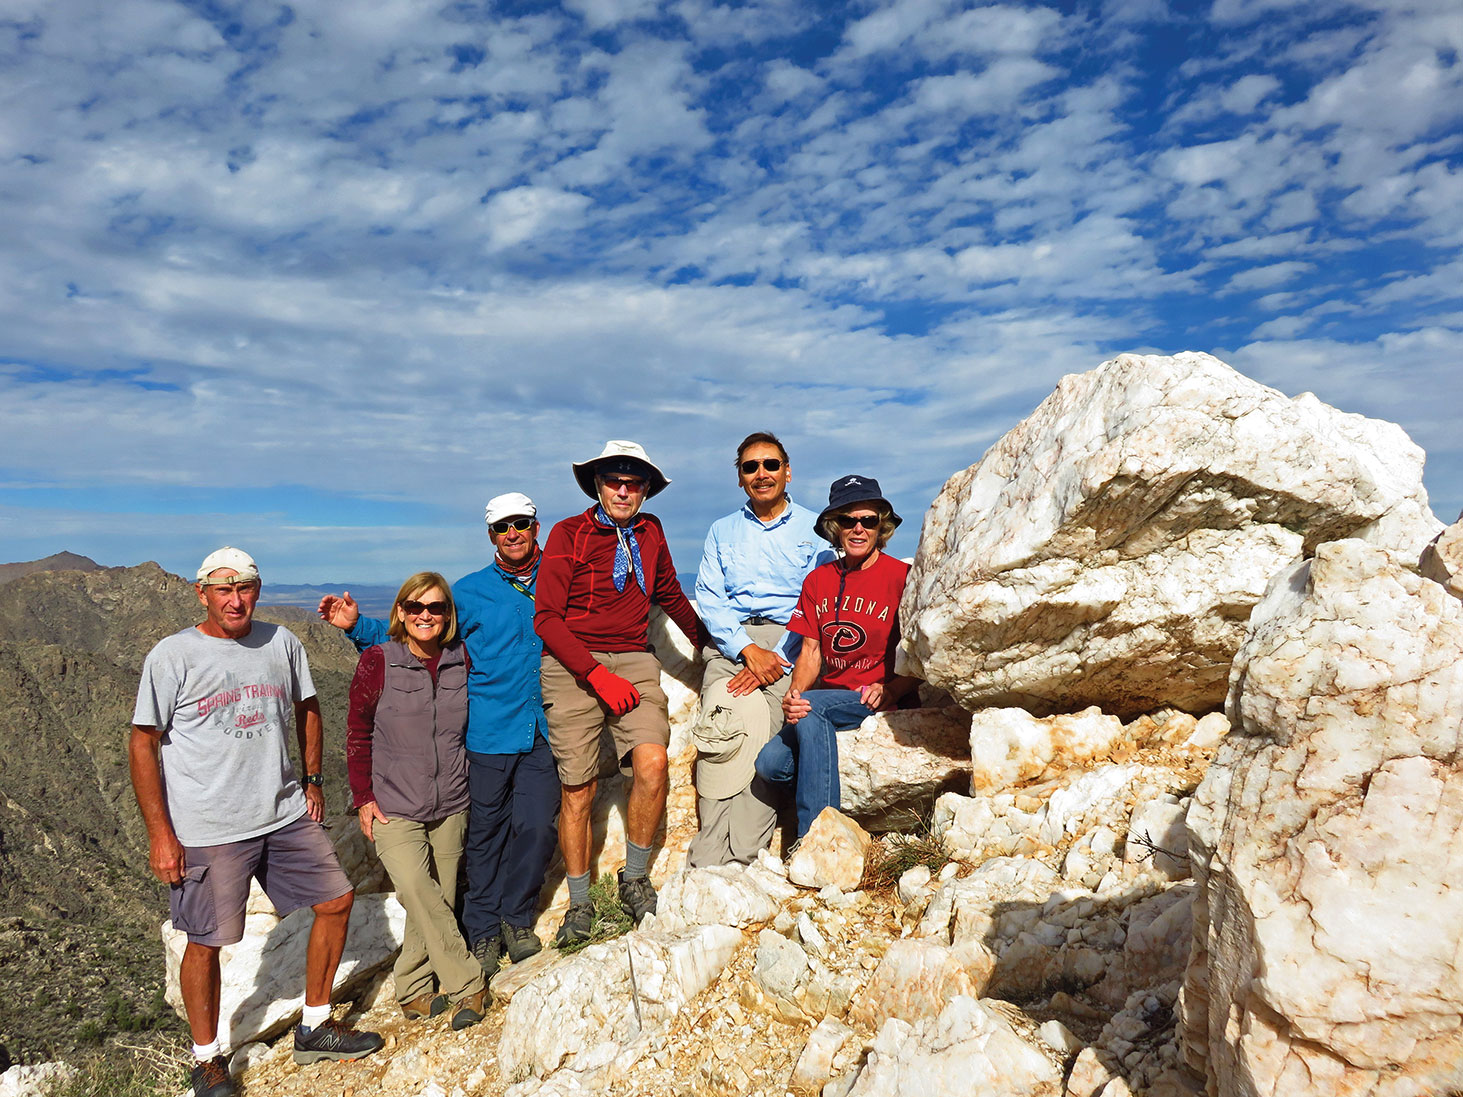 Left to right: Clare Bangs, Donna and Jeff Gillen, Lynn Warren (photographer), Ed Kim and Vicki Carter are surrounded by brilliant white on the summit of Quartz Peak.